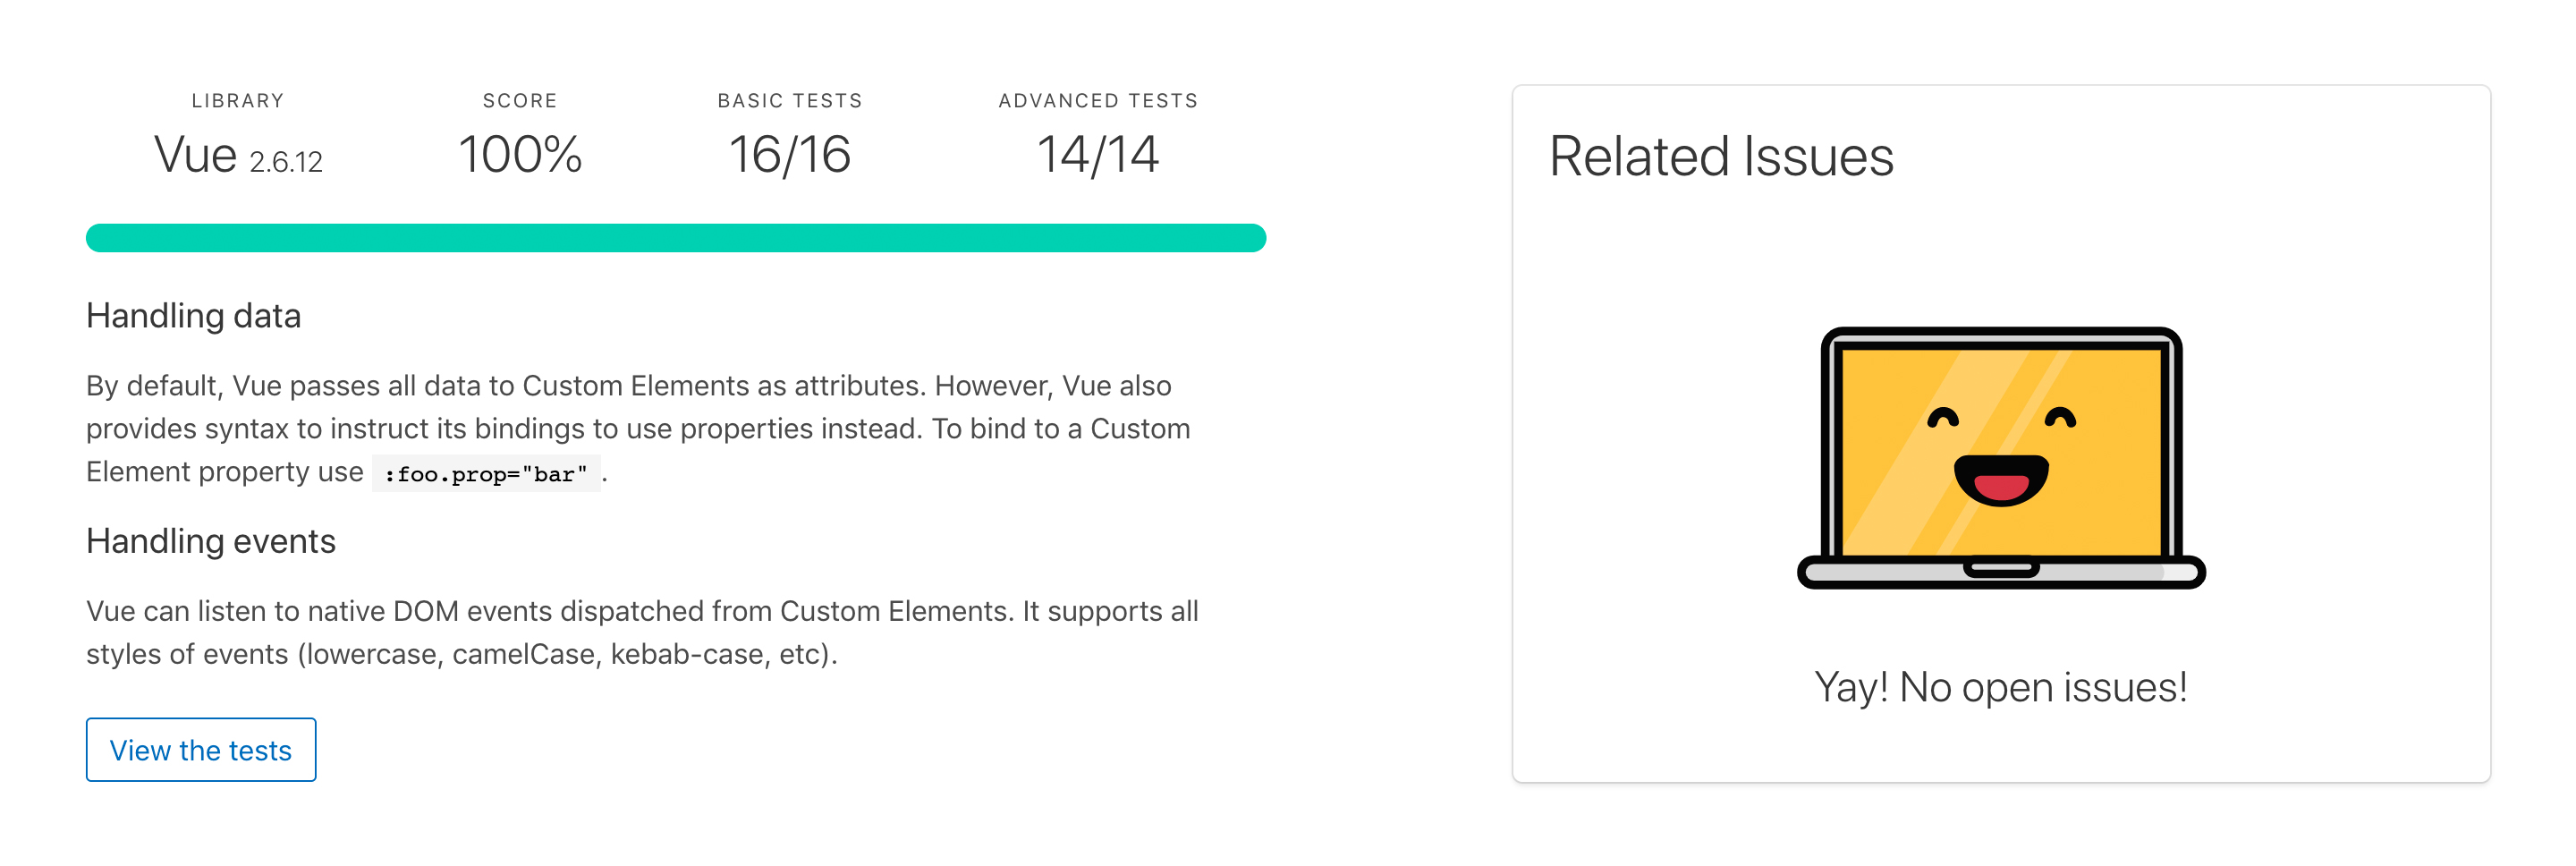 Test results from custom-elements-everywhere.com showing Vue 2.6.12 scored 100%, passed 16/16 Basic tests, and 14/14 advanced tests with an explanation.